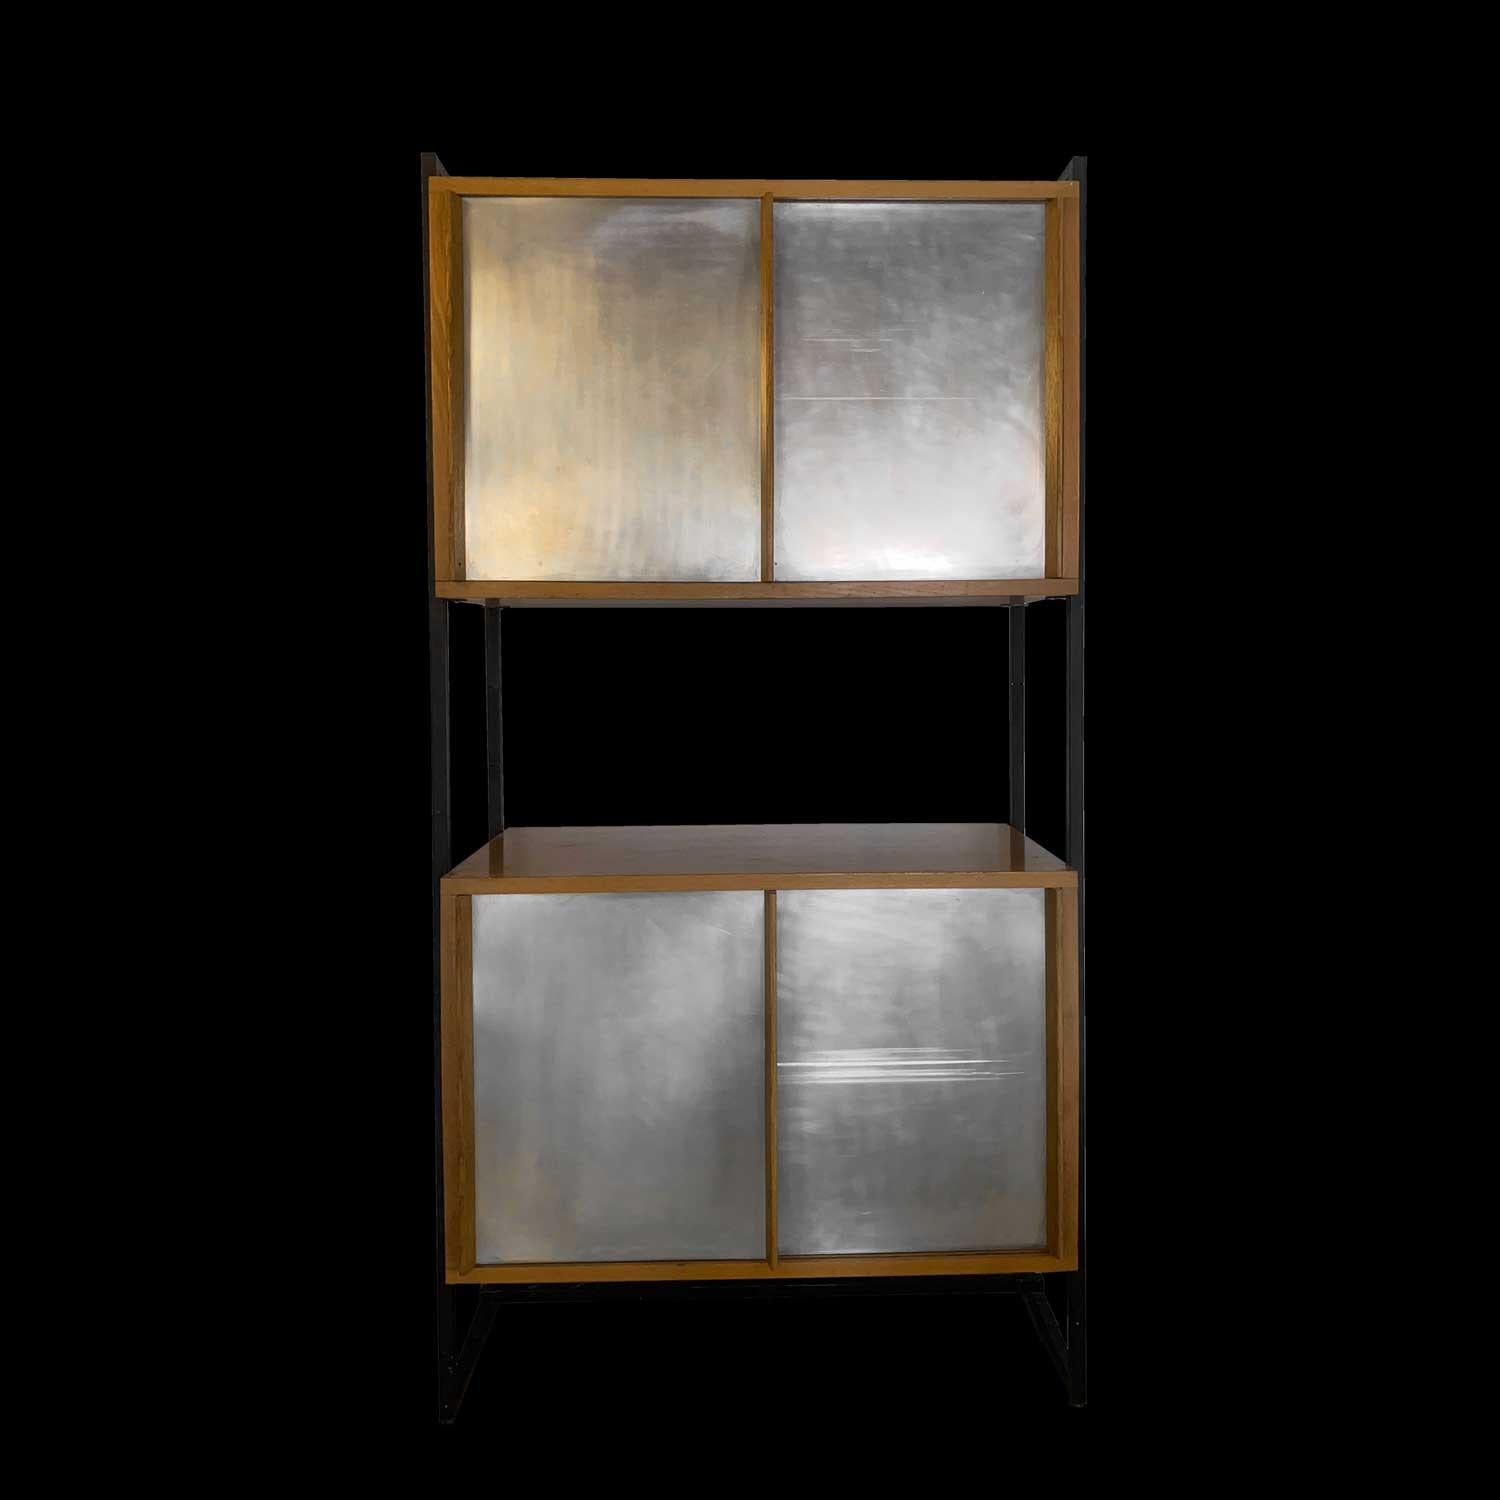 George Frydman
Two-part china cabinet with aluminum doors and oak structure dating from the 1950s. Beautiful patina, Georges Frydman has always designed adaptable furniture (the height of the boxes can be moved)